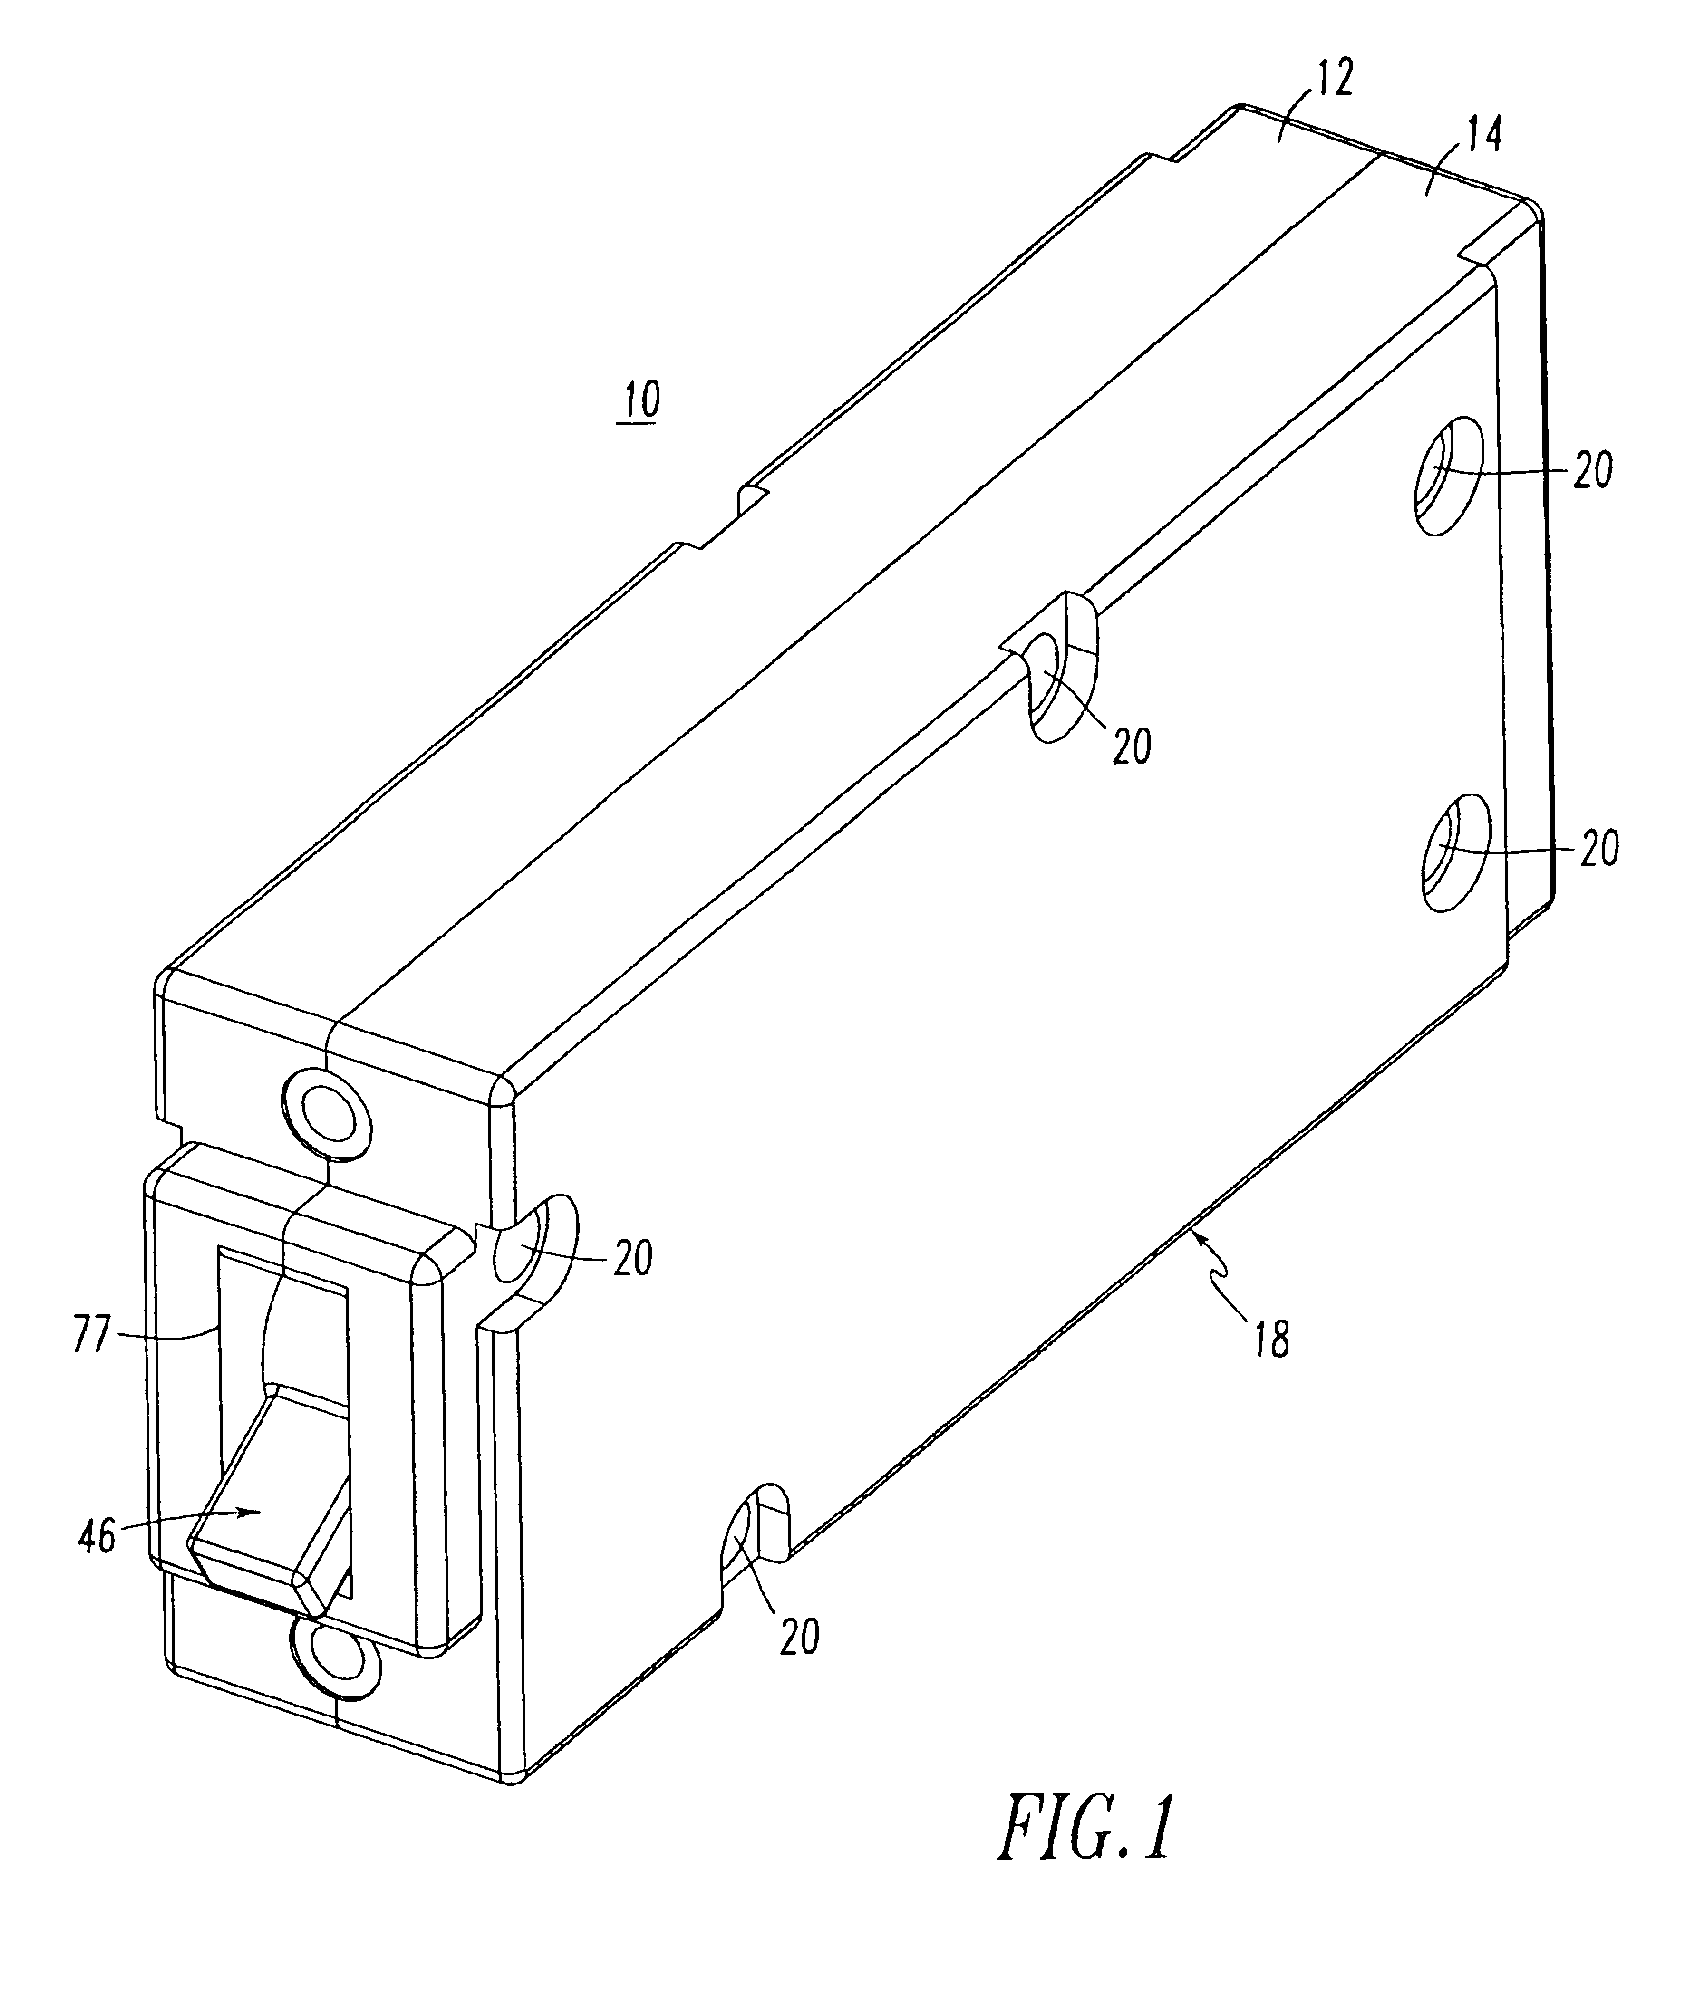 Circuit breaker including extension spring(s) between operating mechanism pivot and operating handle